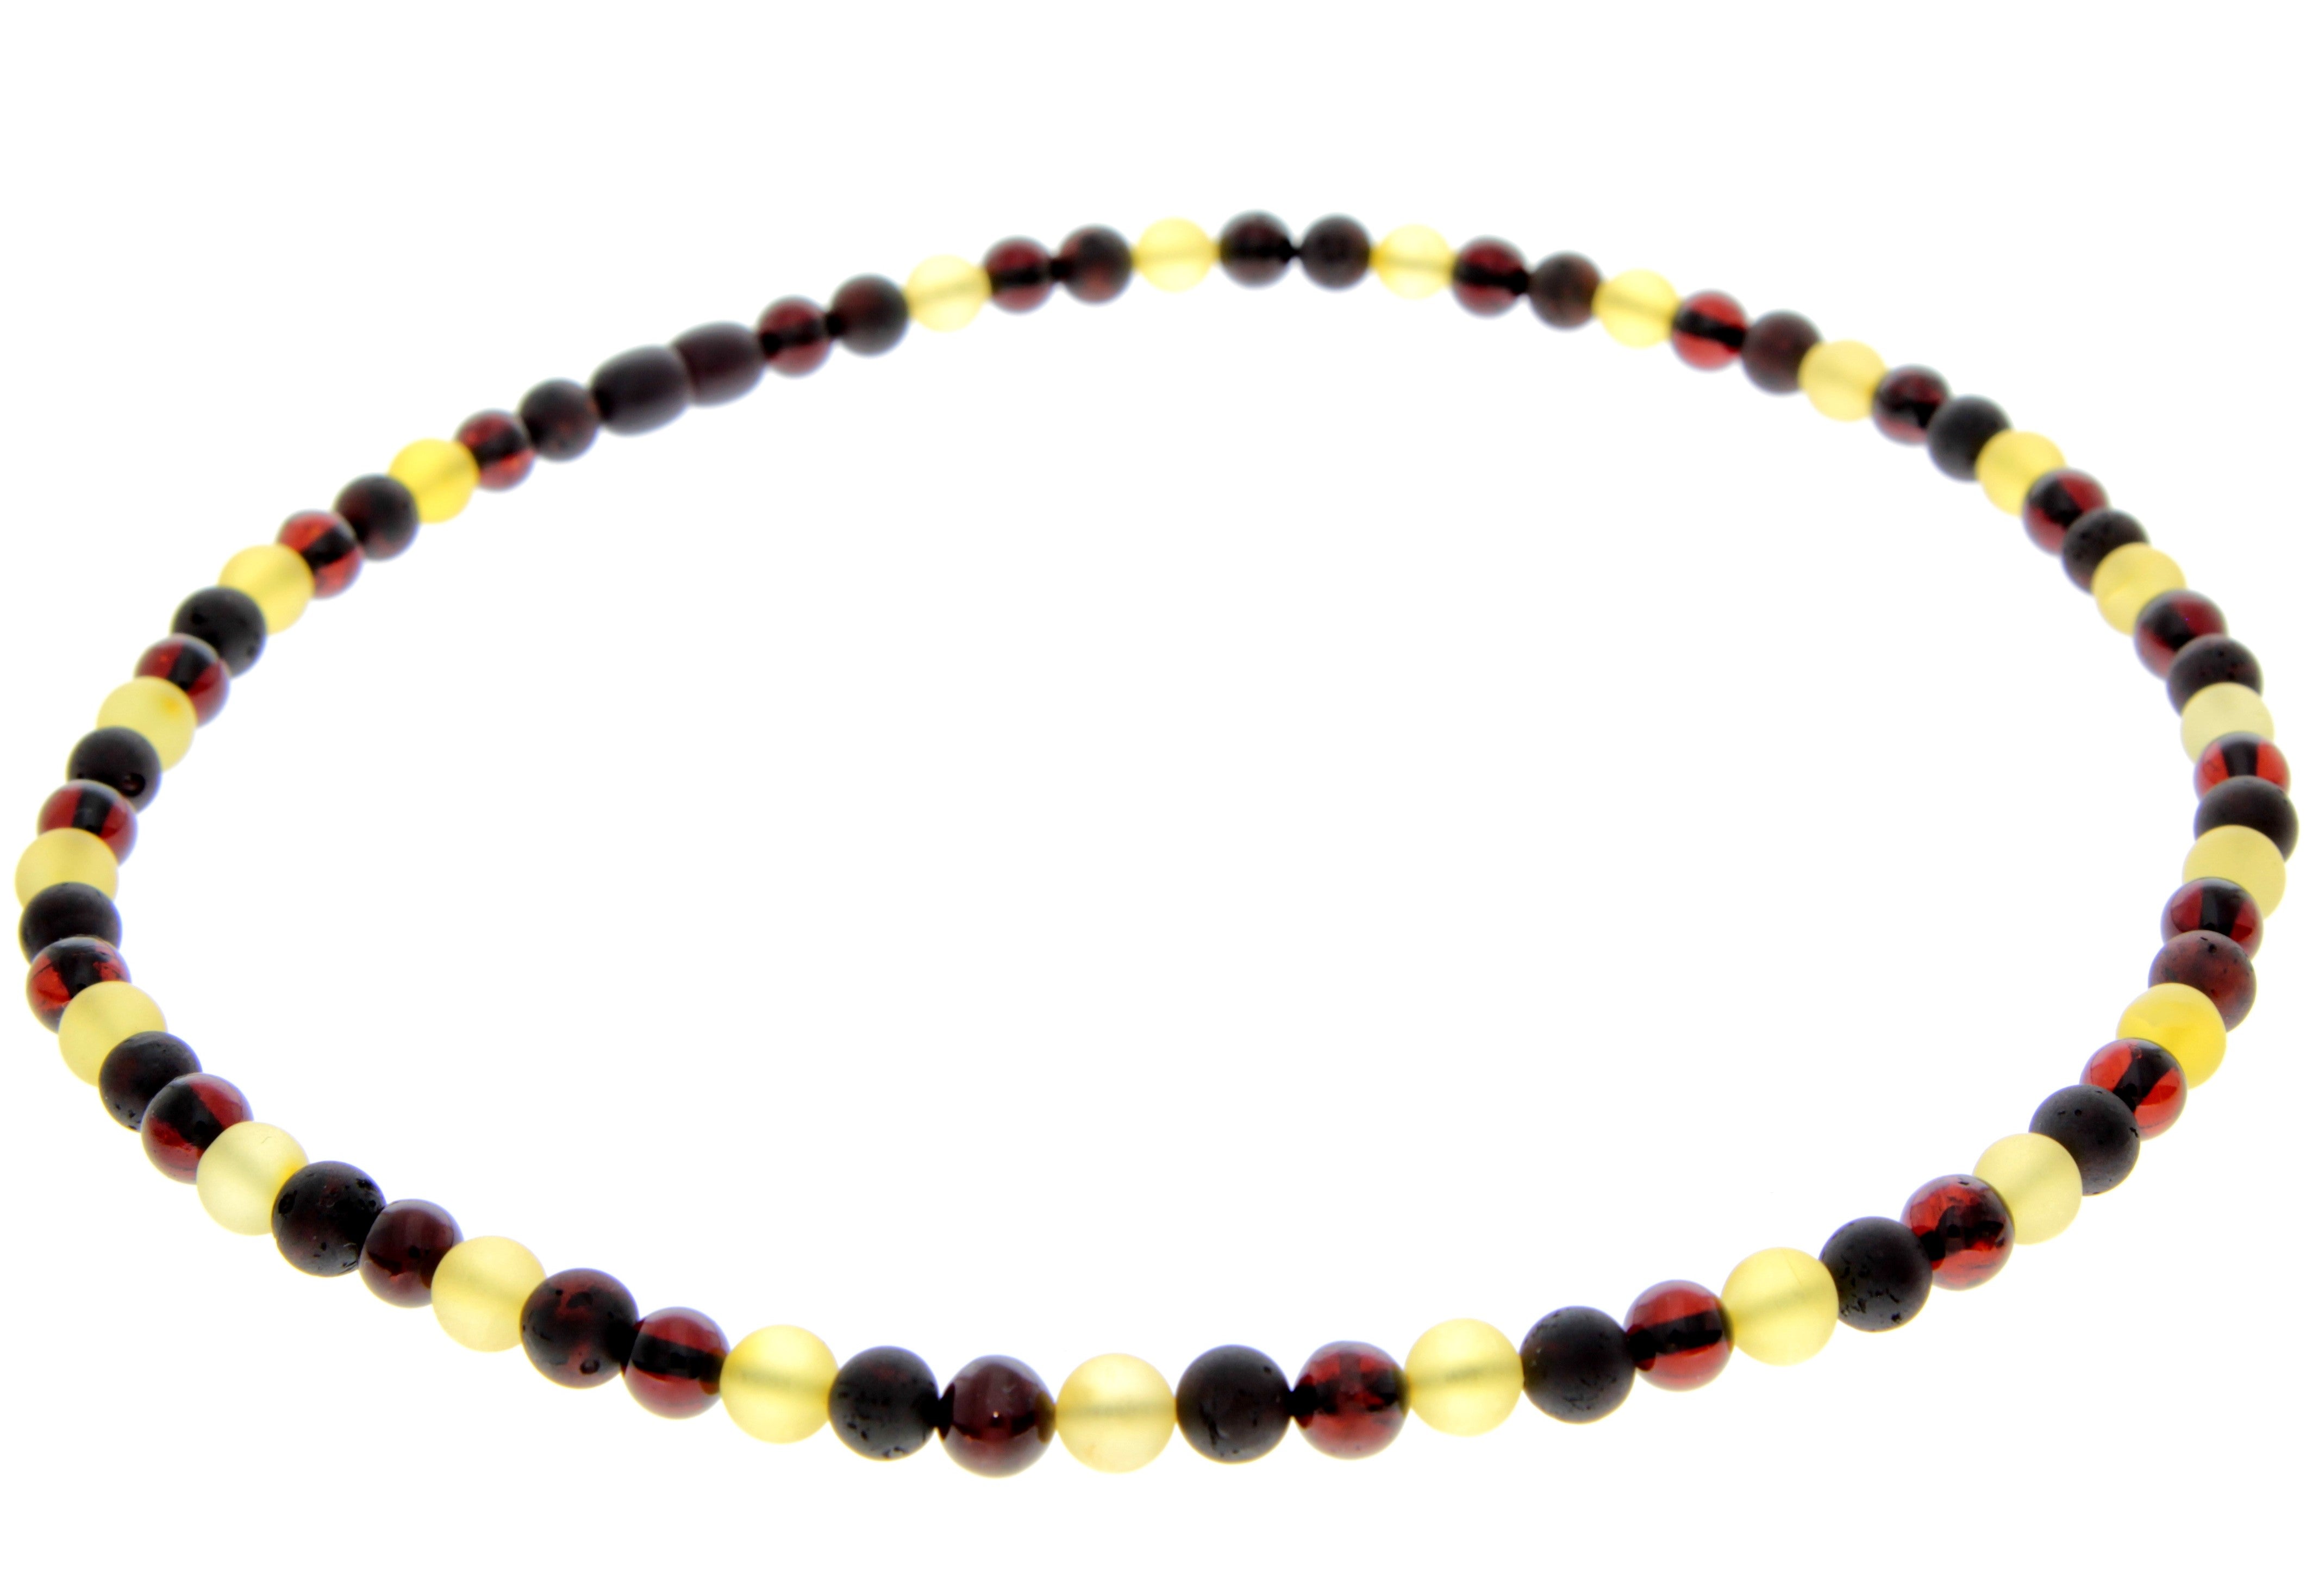 Genuine Baltic Amber Round Beads for Men / Unisex Beaded Necklace. MB022